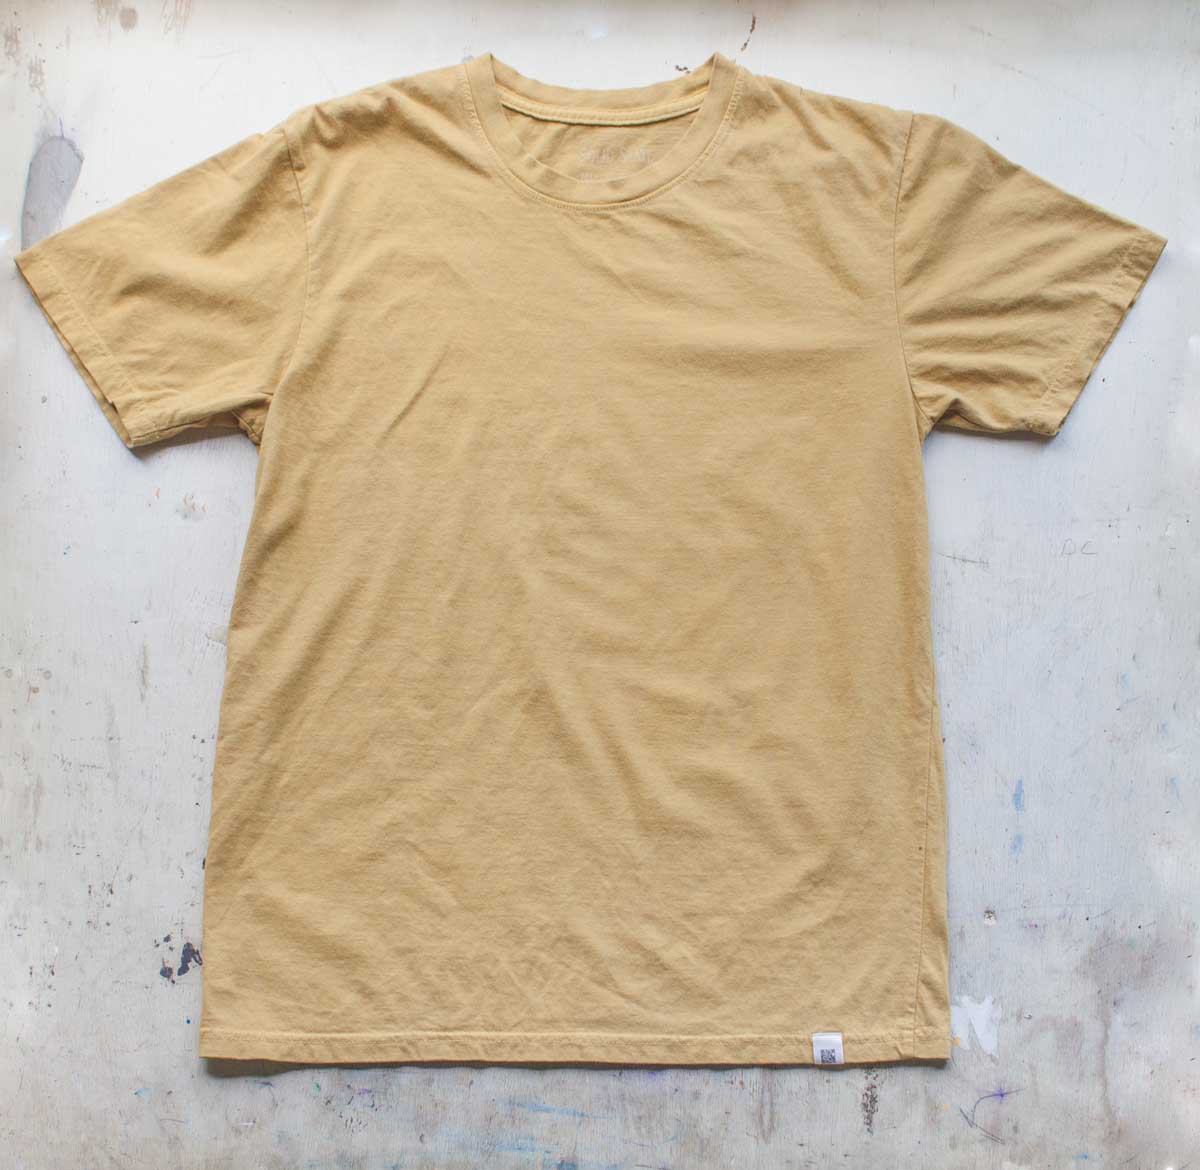 A Solid State Clothing Natural Dye t-shirt lies against a white background. The color of the shirt is Citrine, which is a darker, muted shade of yellow